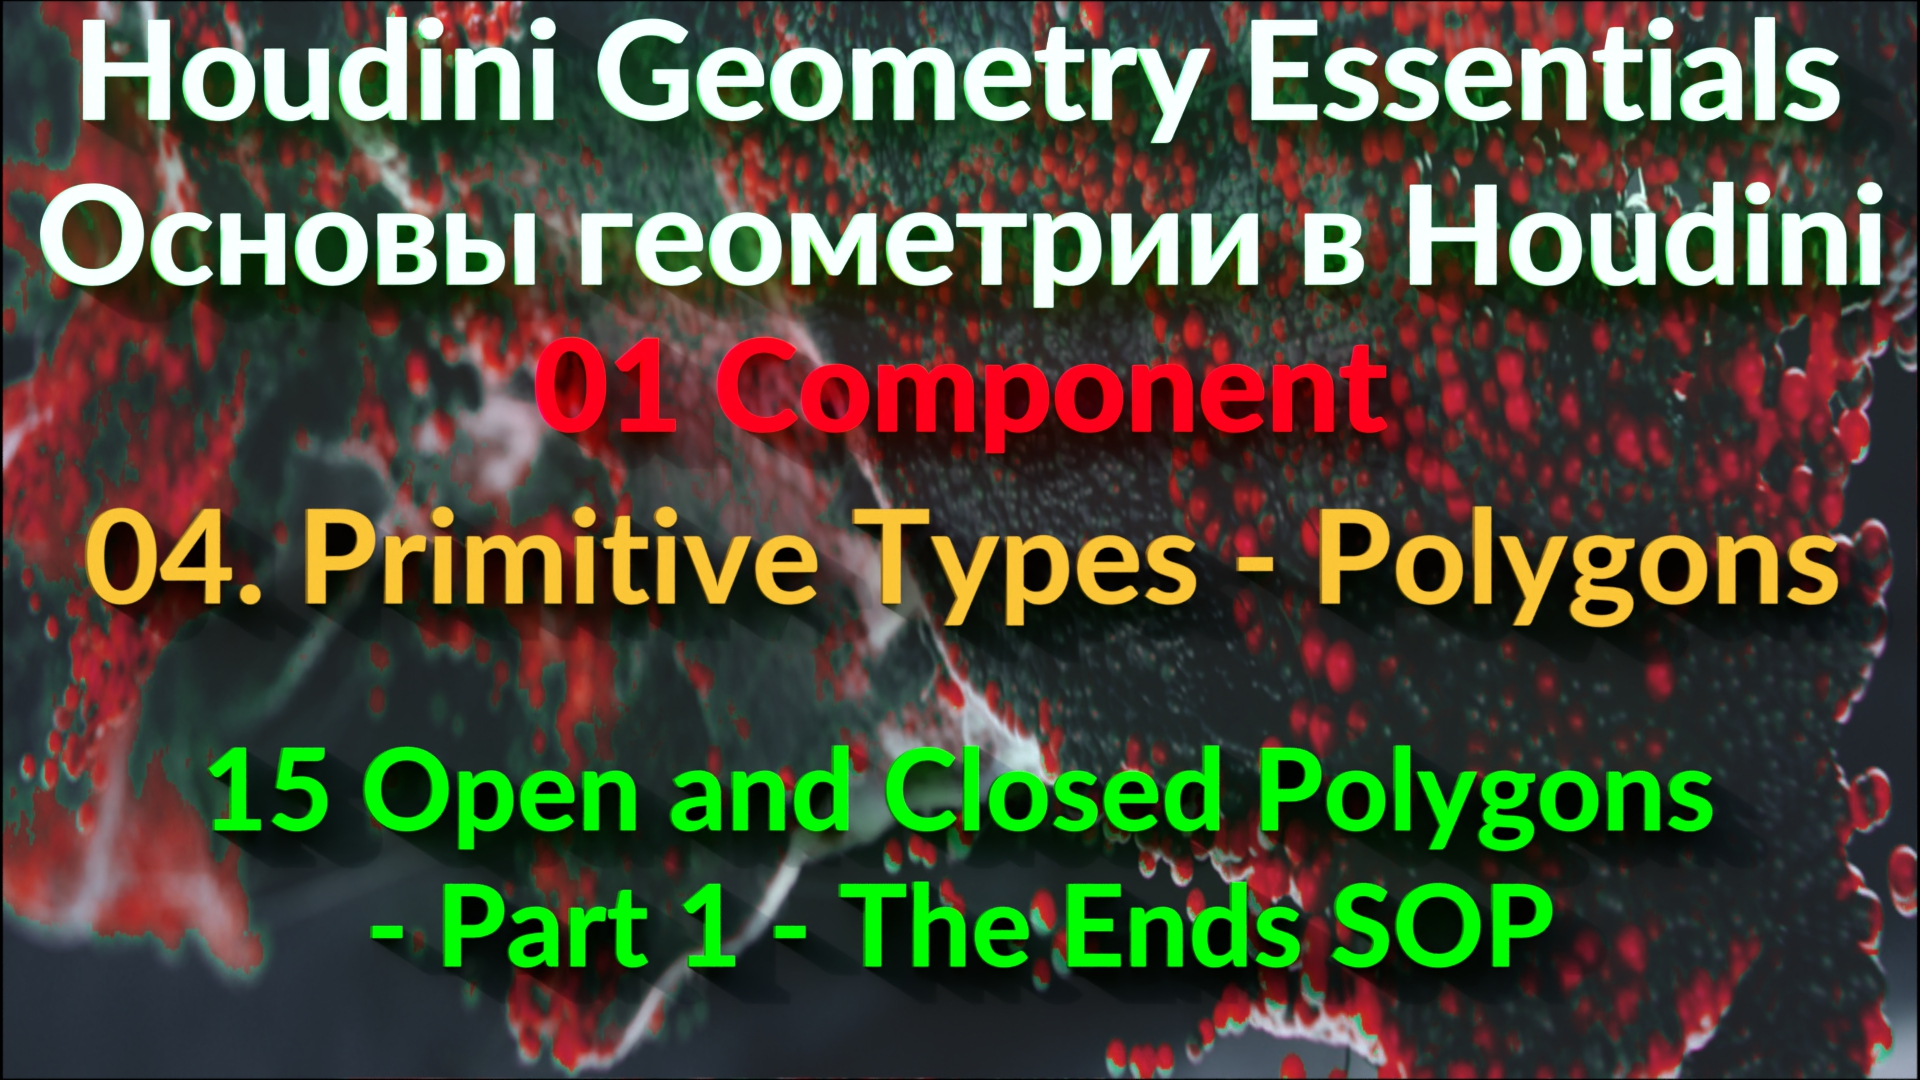 01_04_15. Open and Closed Polygons - Part 1 - The Ends SOP